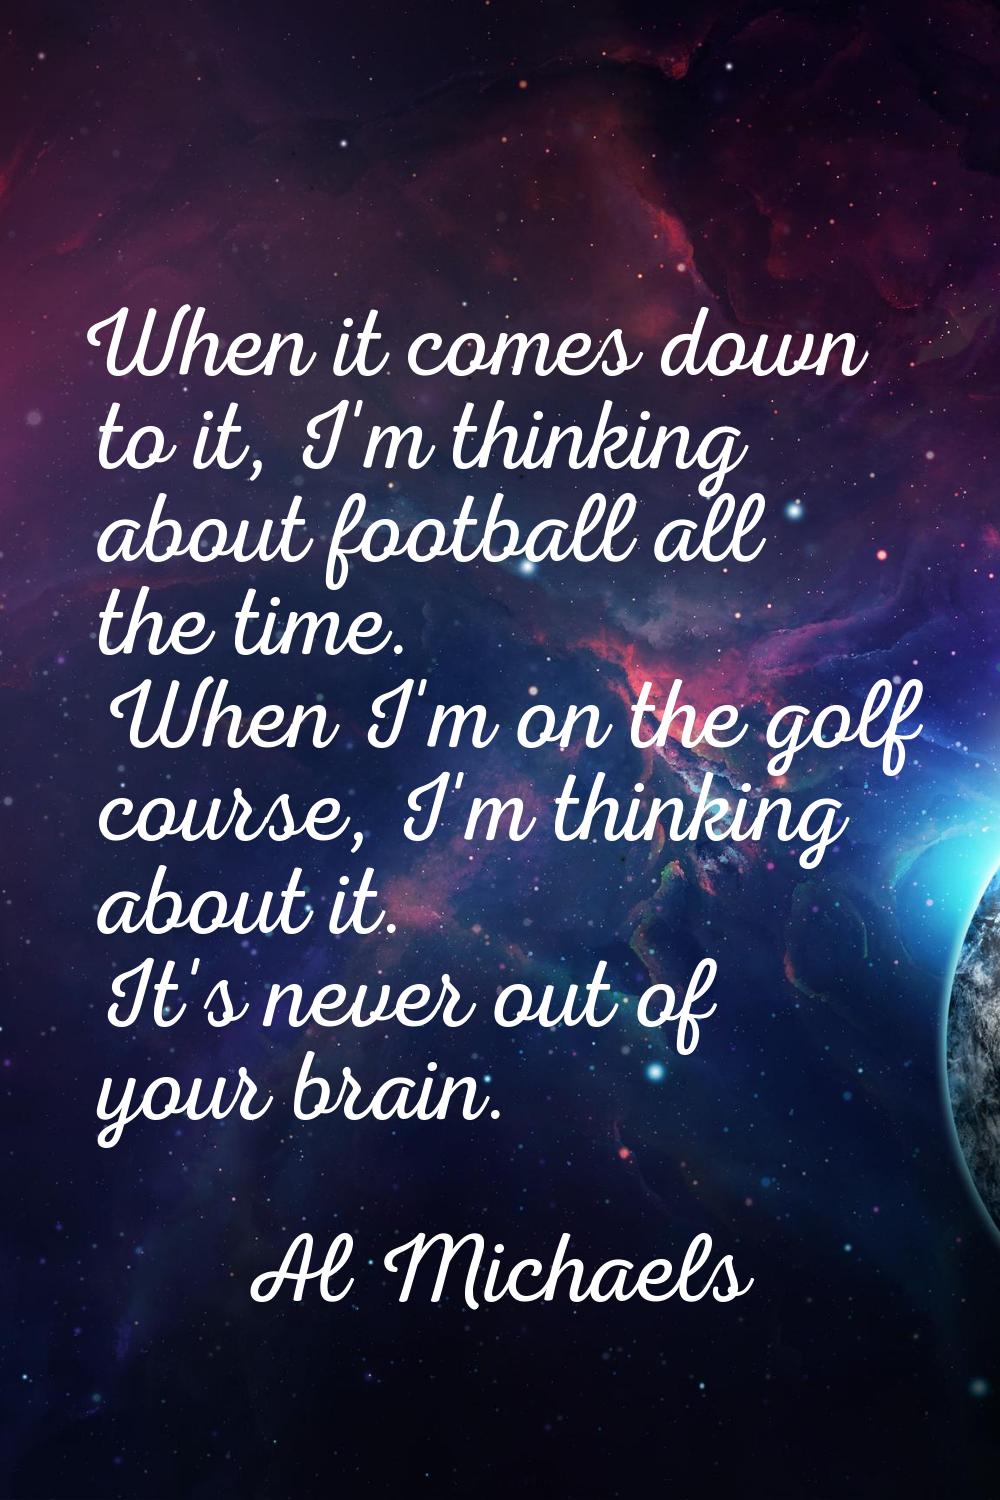 When it comes down to it, I'm thinking about football all the time. When I'm on the golf course, I'